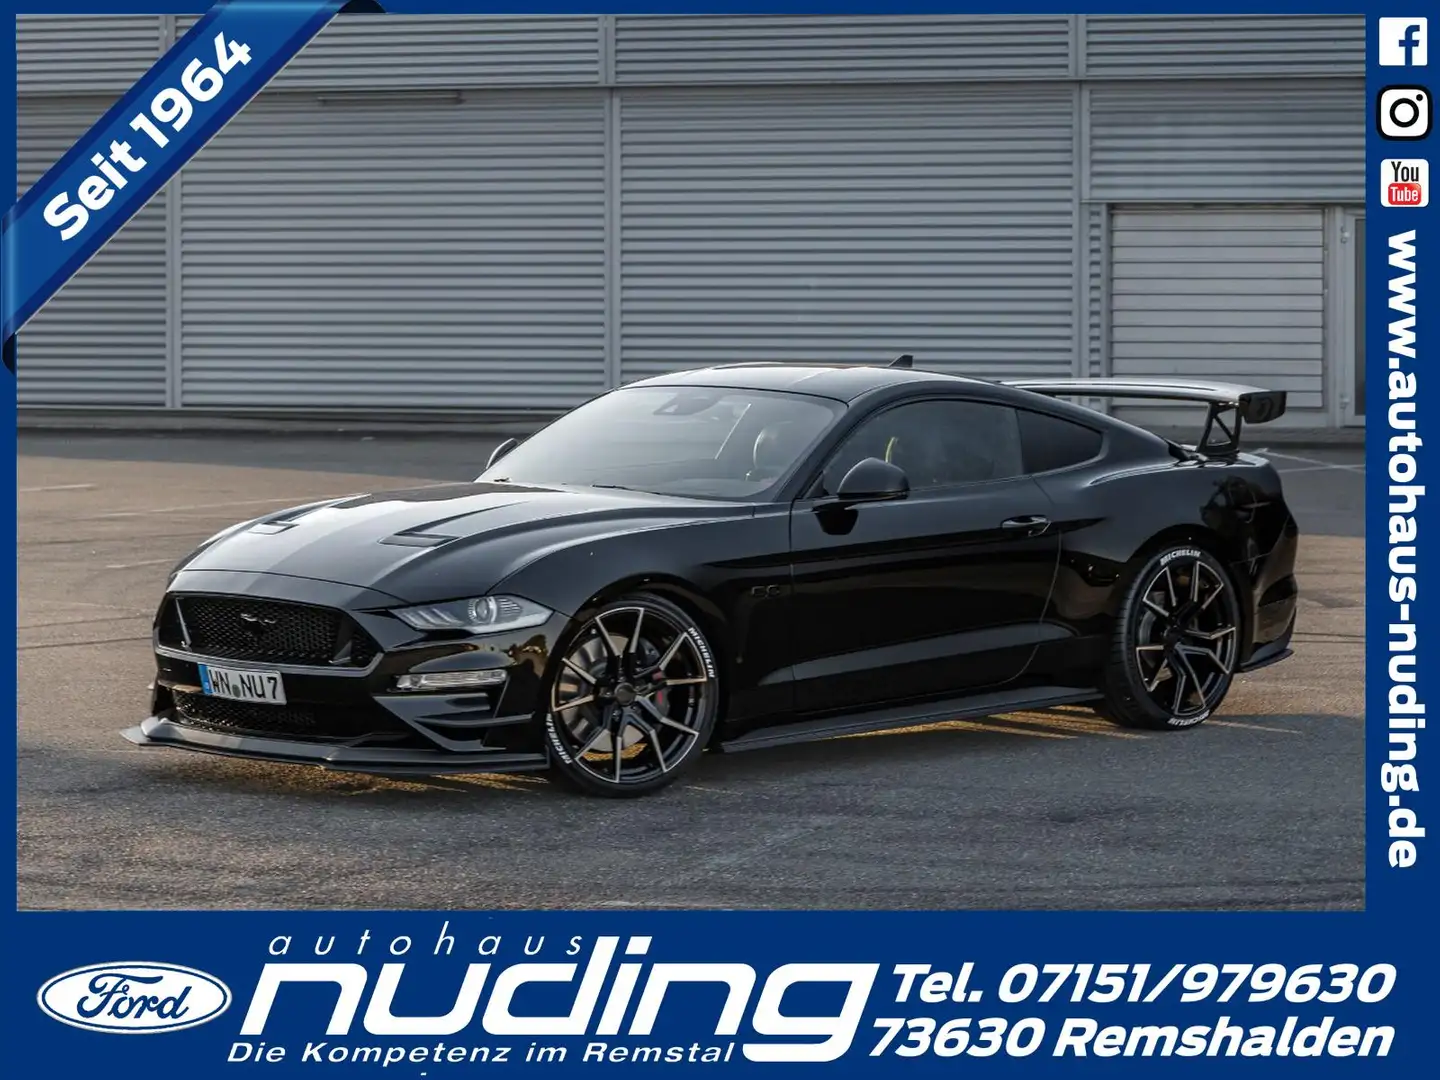 Ford Mustang GT 5.0 V8 Aut. Nuding Performance Umbau crna - 1